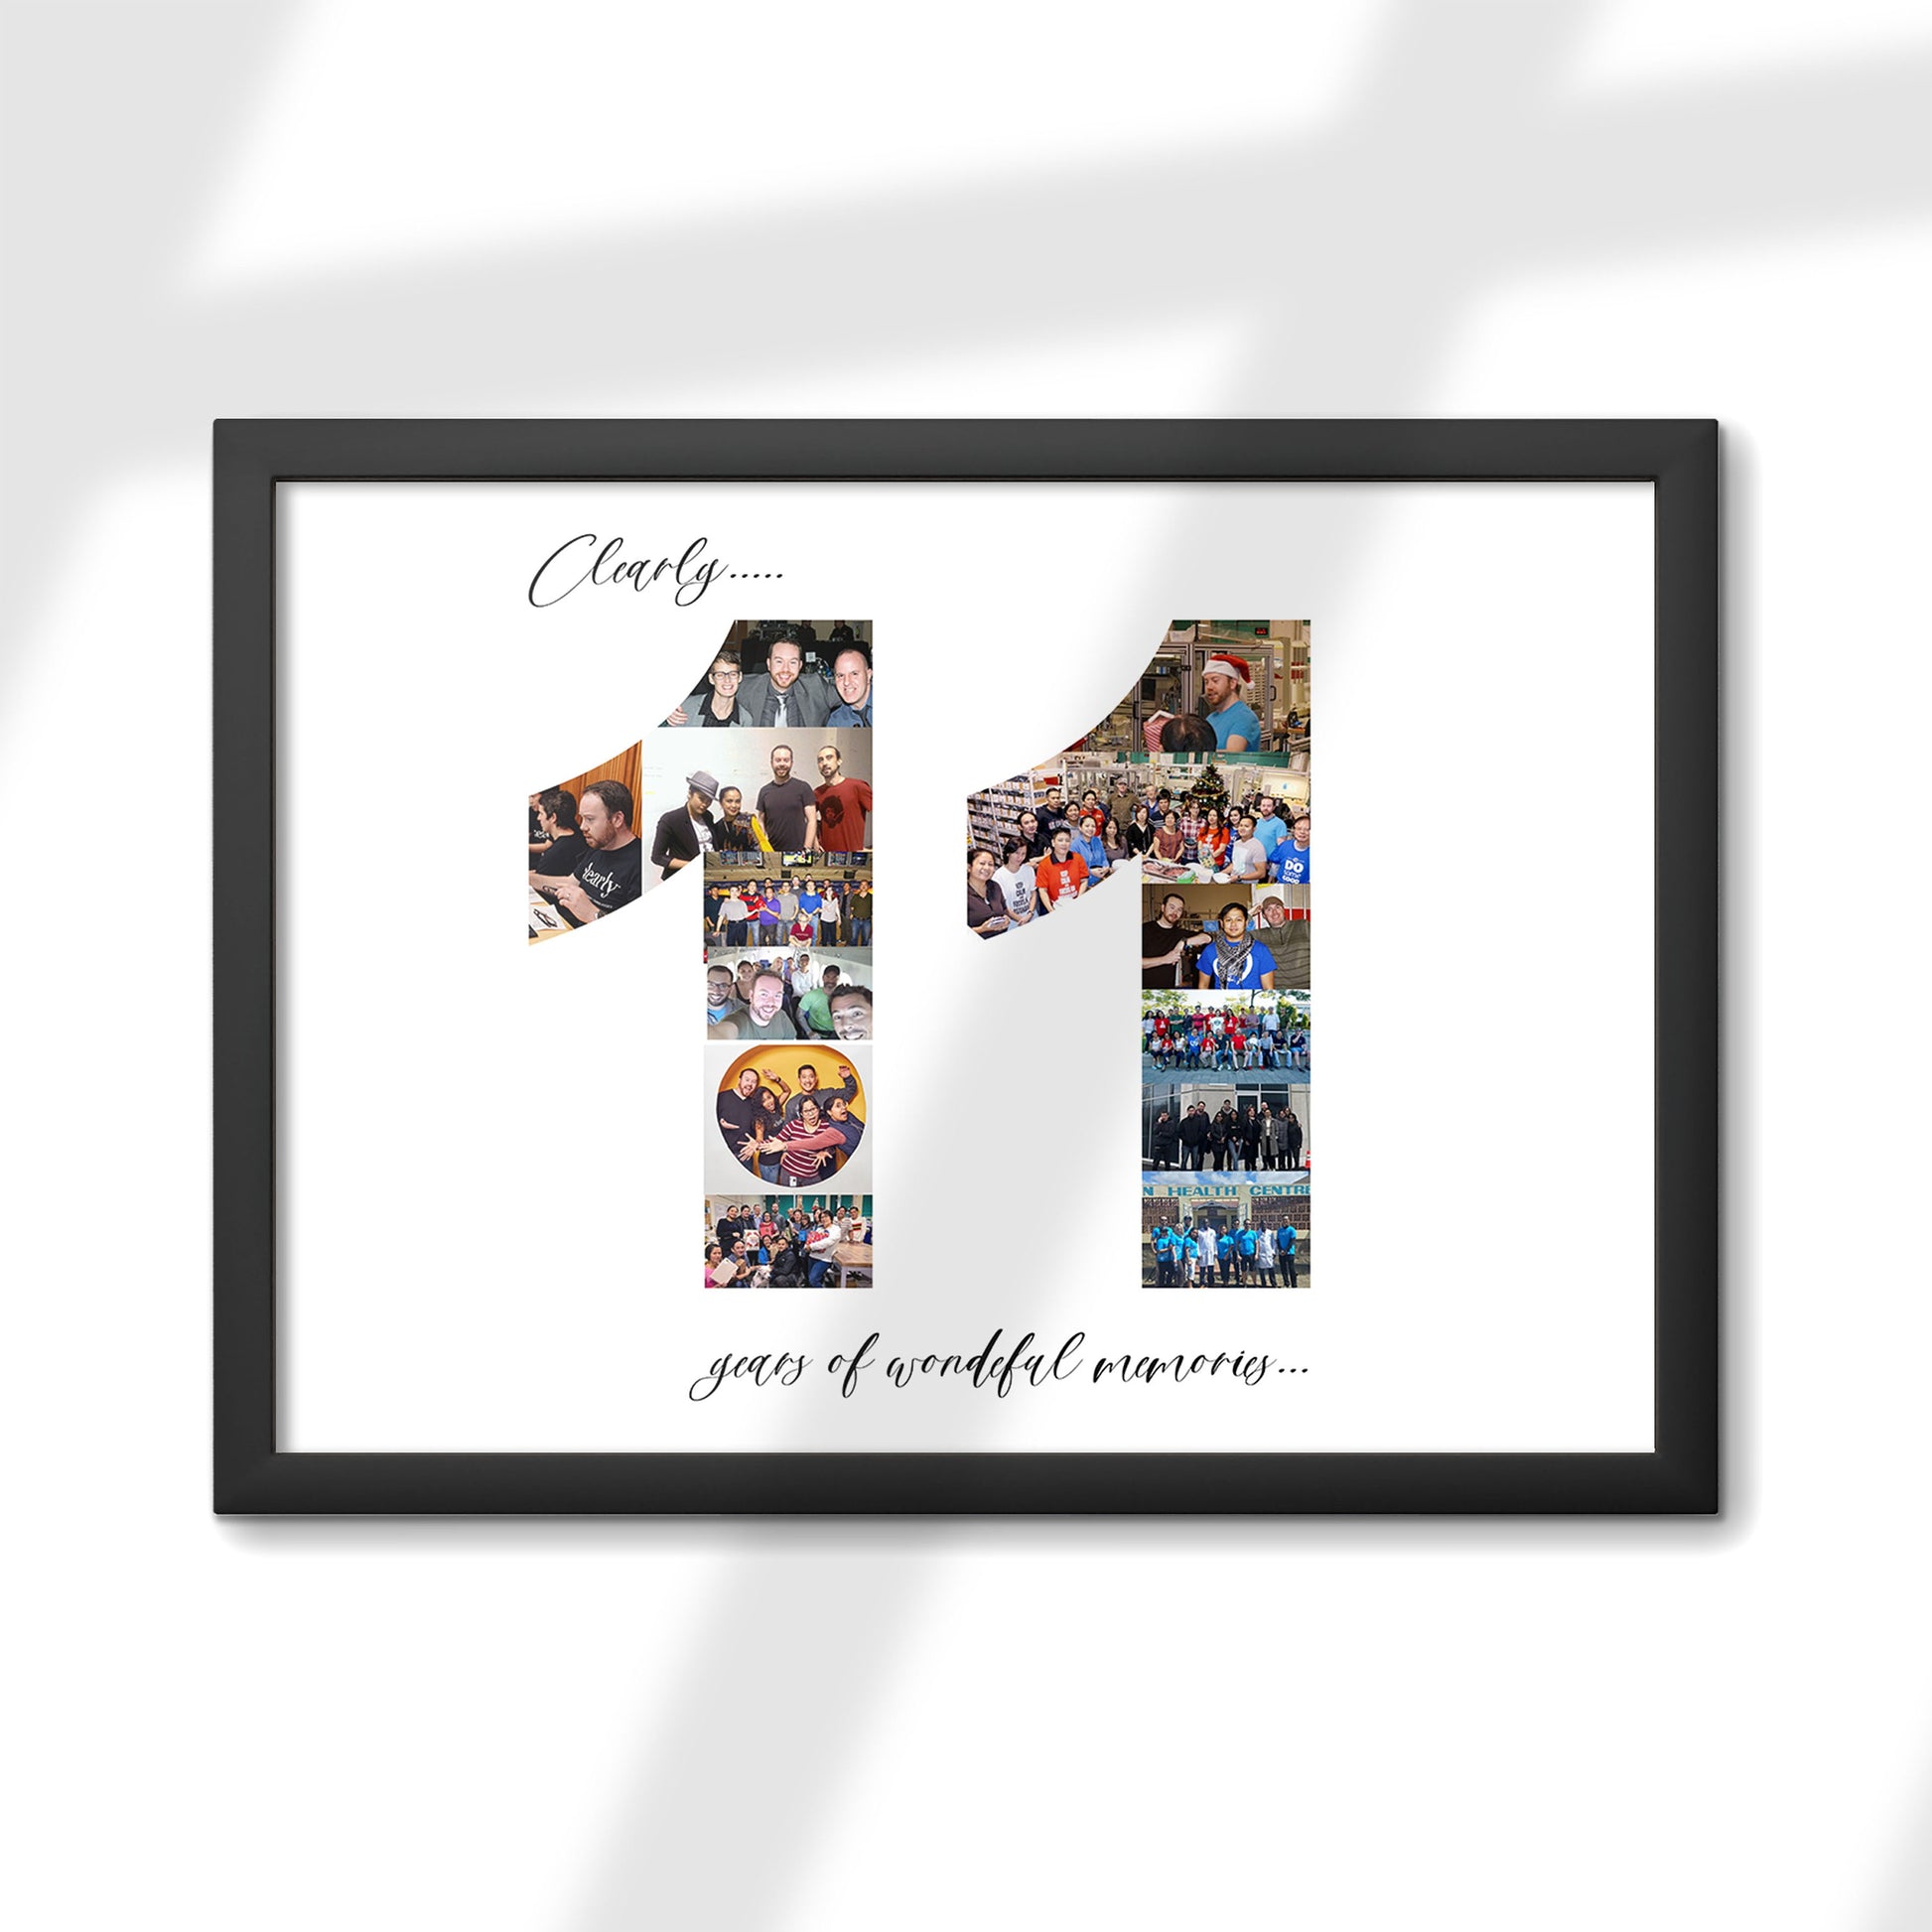 Retirement Photo Gift, Office Photo Collage, Photo Gifts for Colleagues